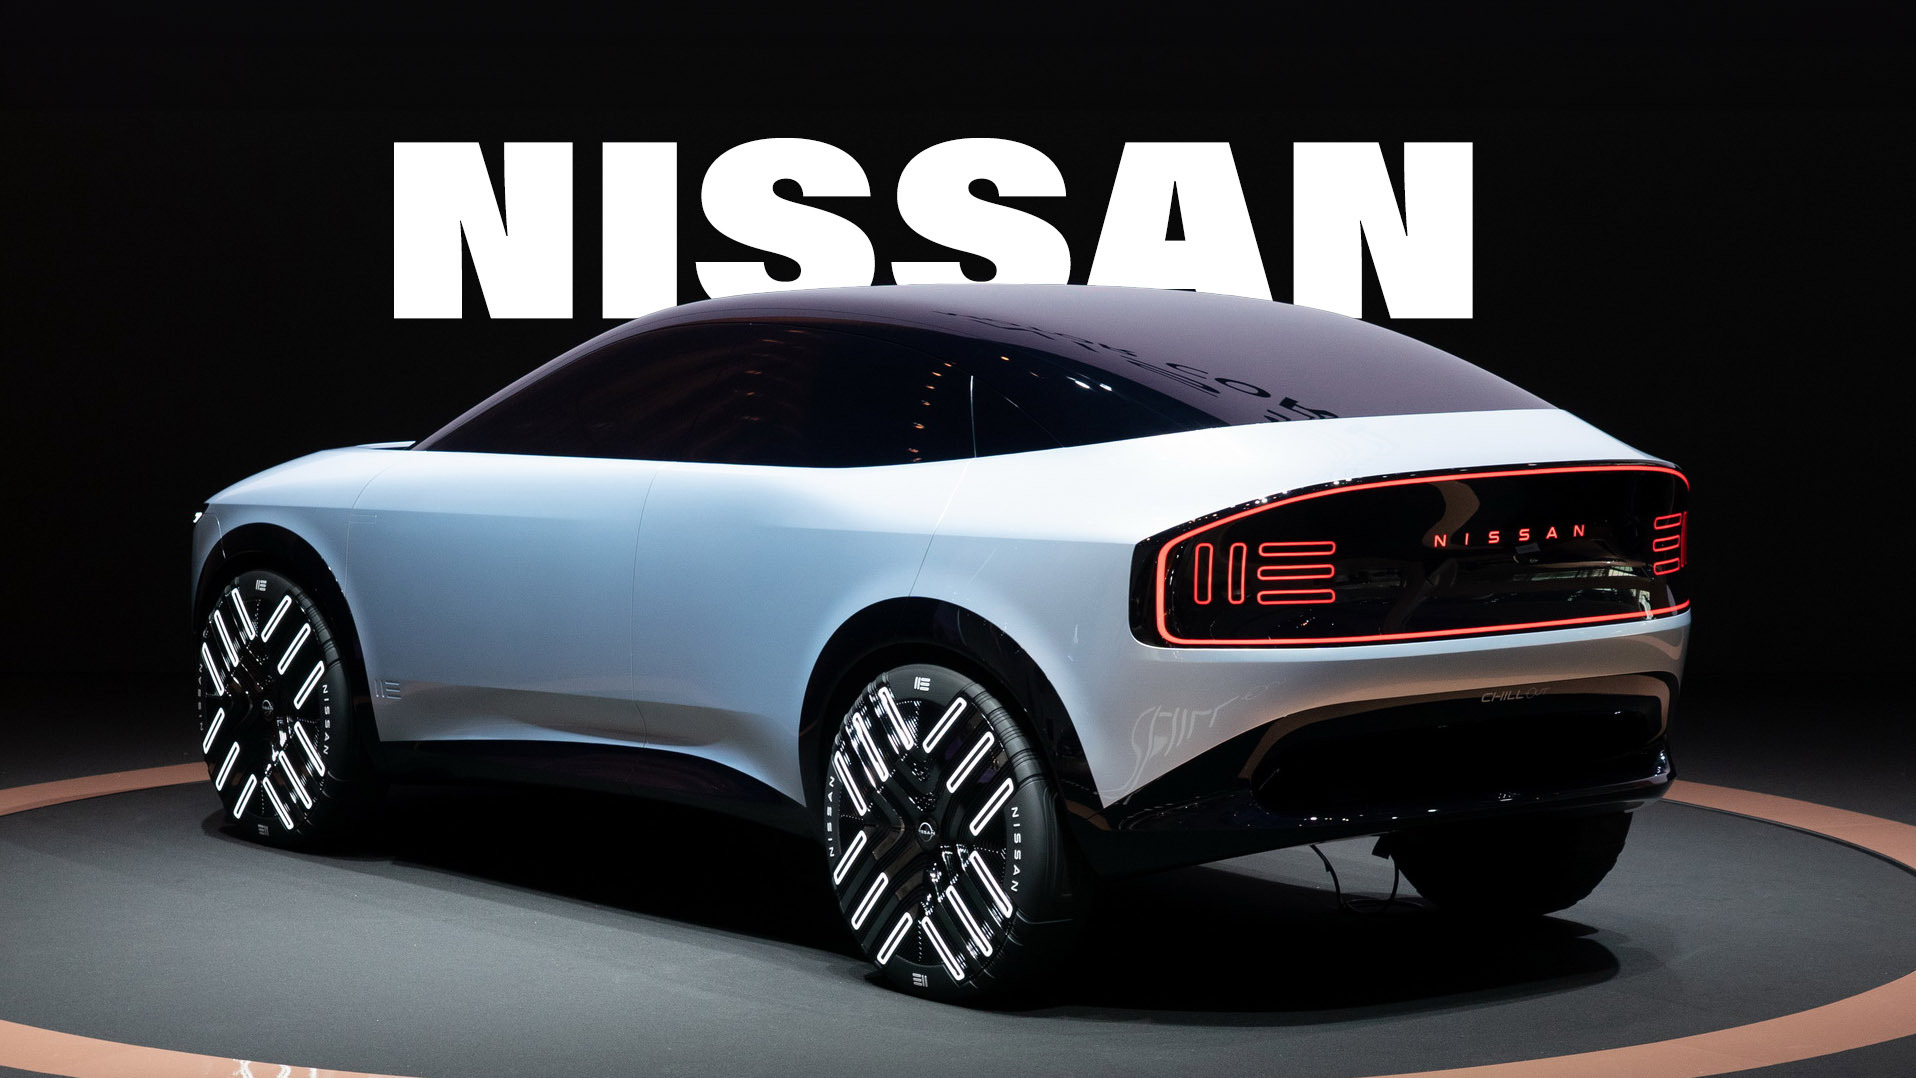 2026 Nissan Leaf To Be Reborn As A Sleek SUV With Concept Styling